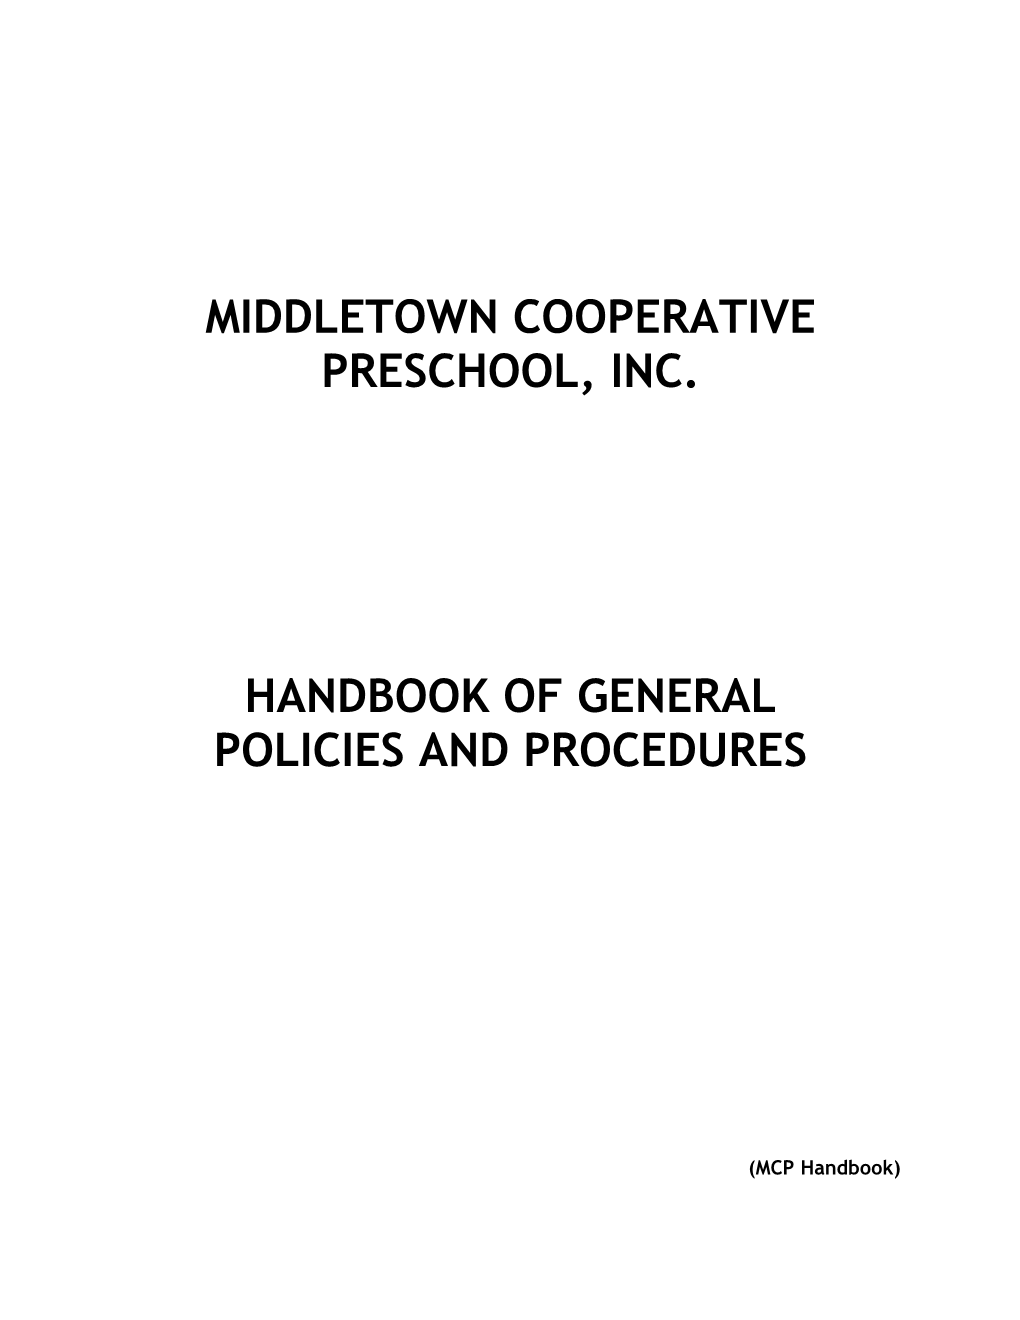 Middletown Cooperative